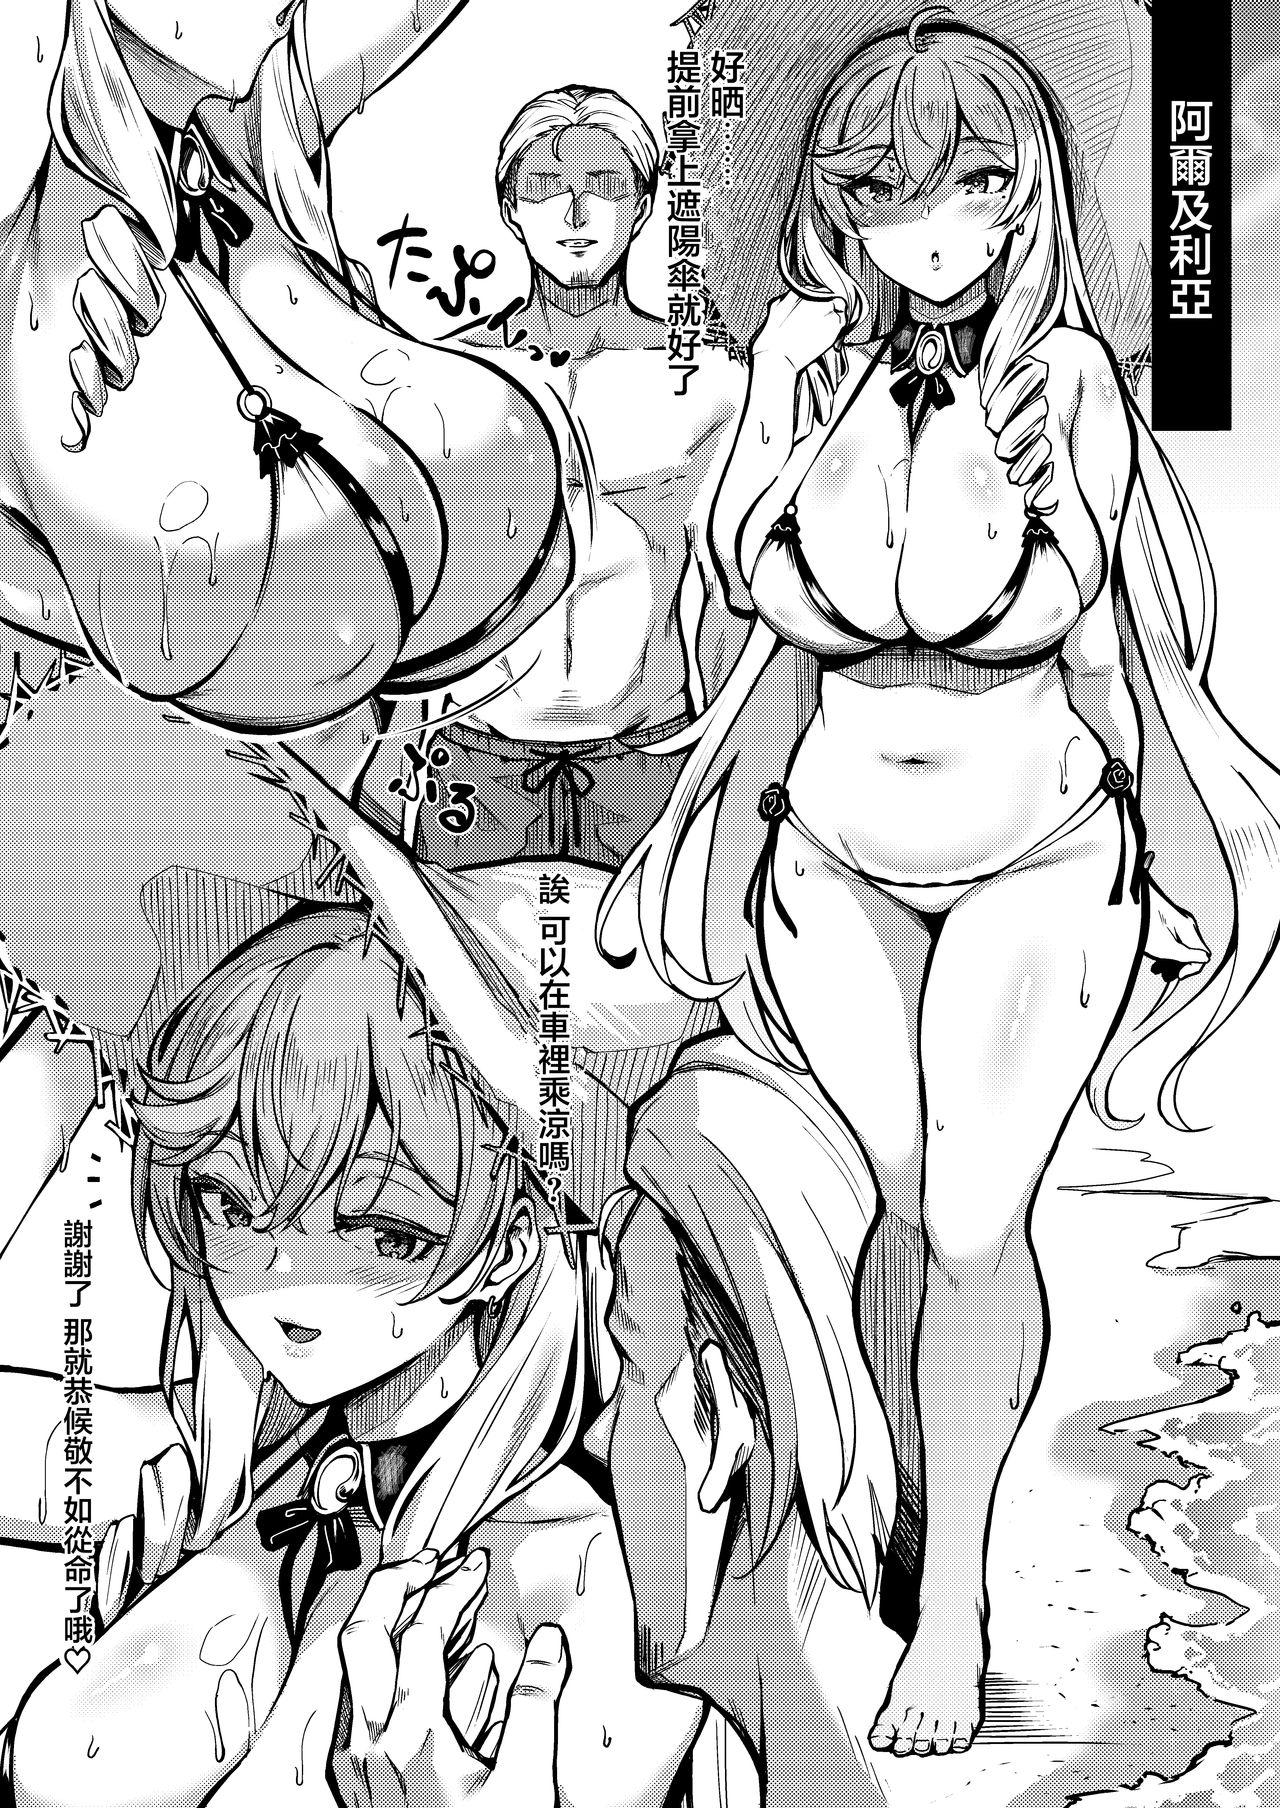 Old Vs Young HEROINE - Azur lane Tittyfuck - Page 5